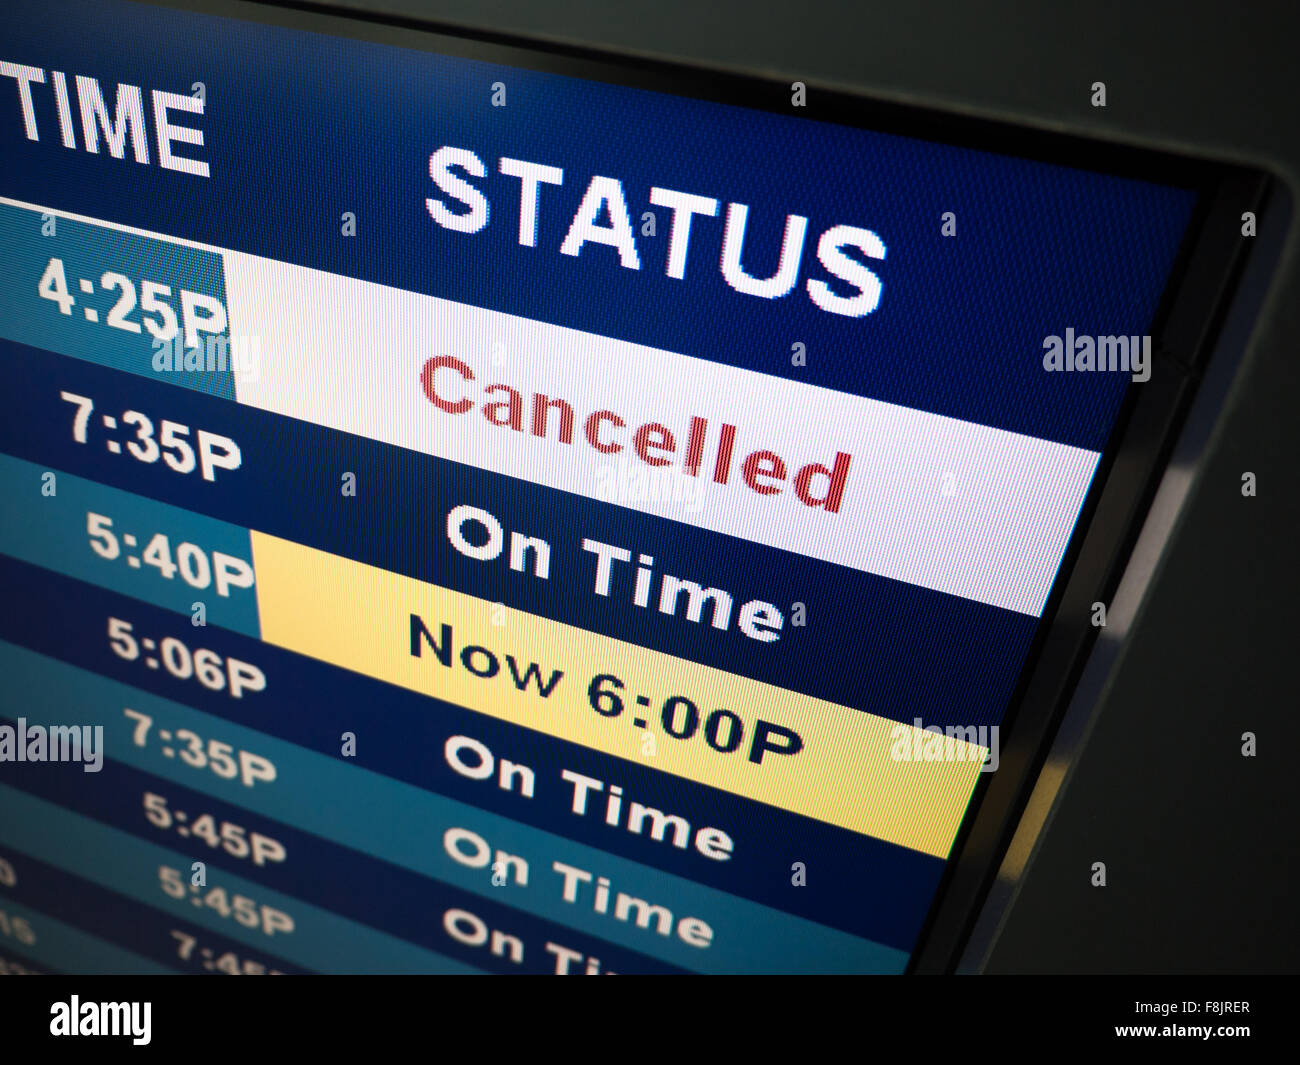 Flight cancelled. Airport arrival and departure board sign showing on-time and cancelled flight status Stock Photo